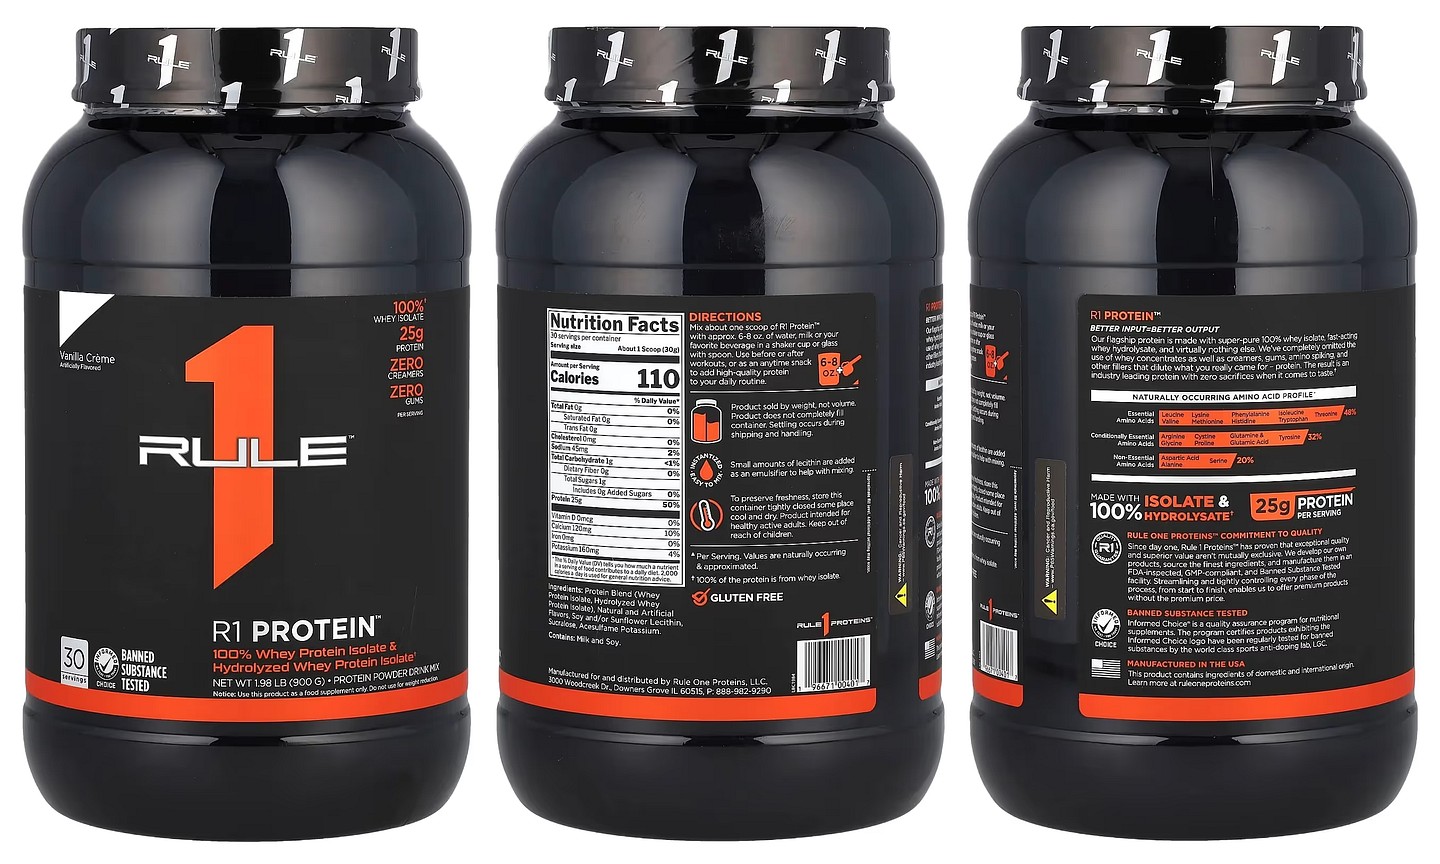 Rule One Proteins, R1 Protein Powder Drink Mix, Vanilla Creme packaging